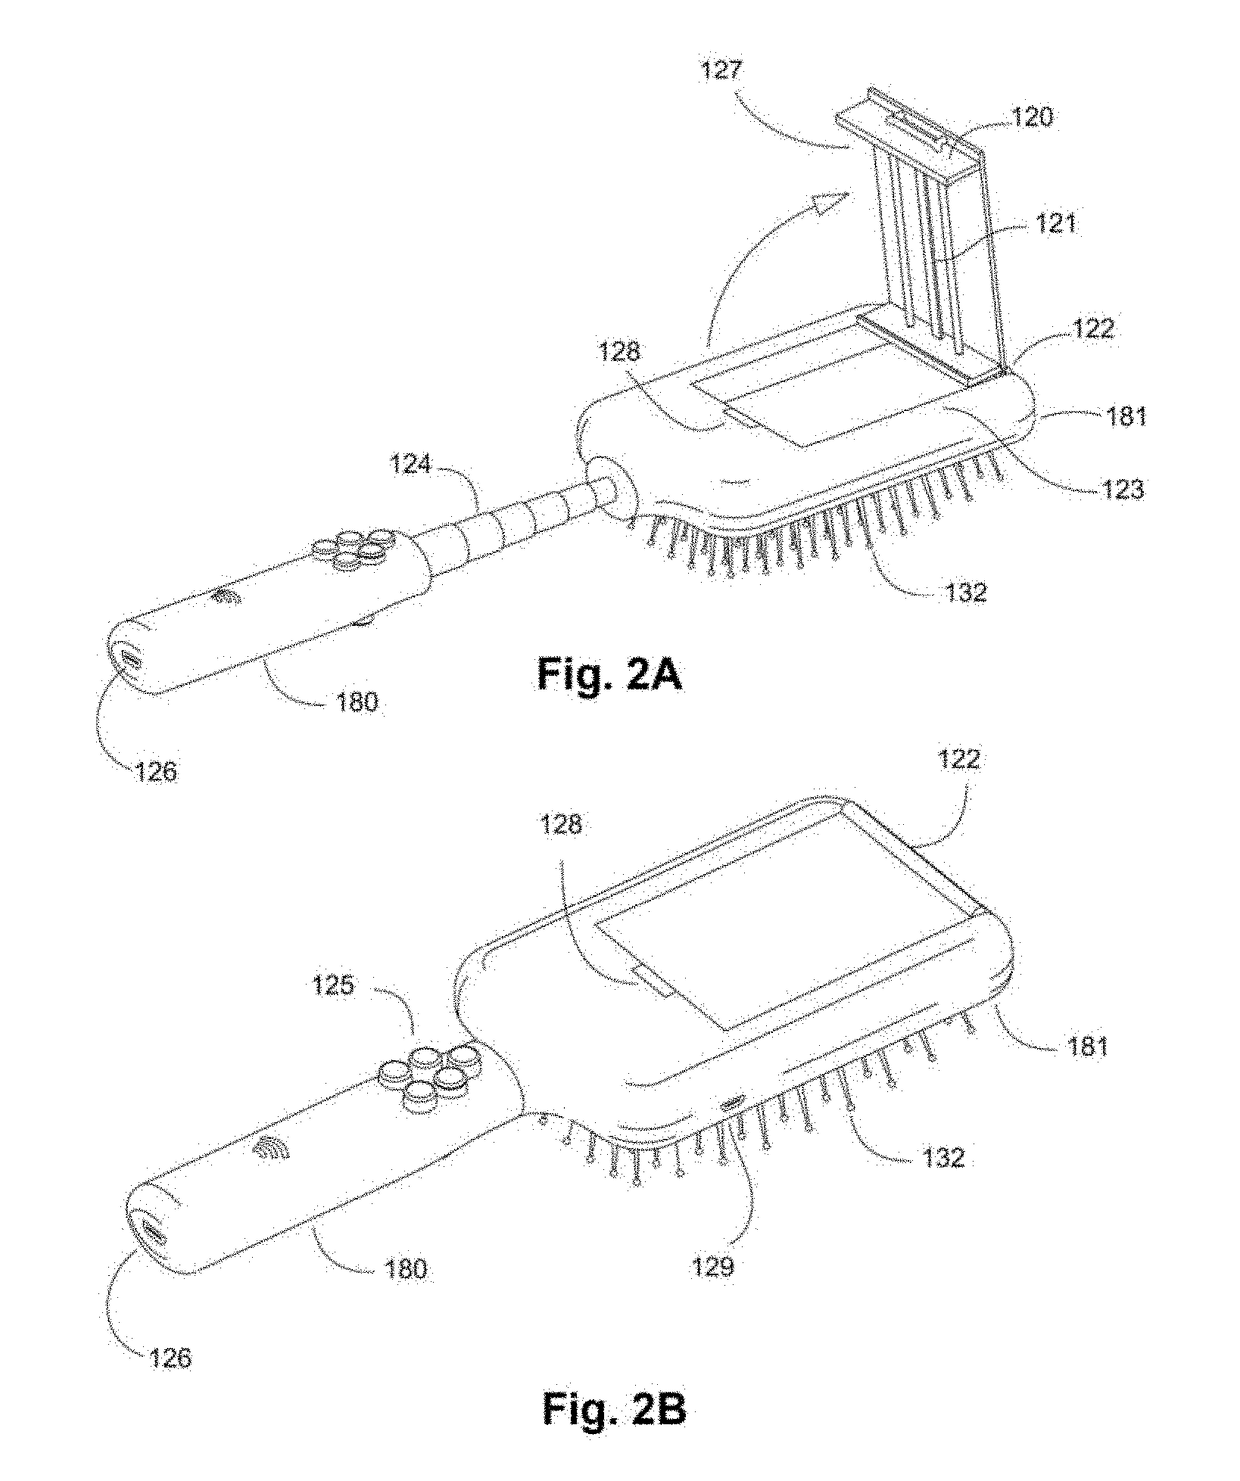 Smart Brushes and Accessories Systems and Methods